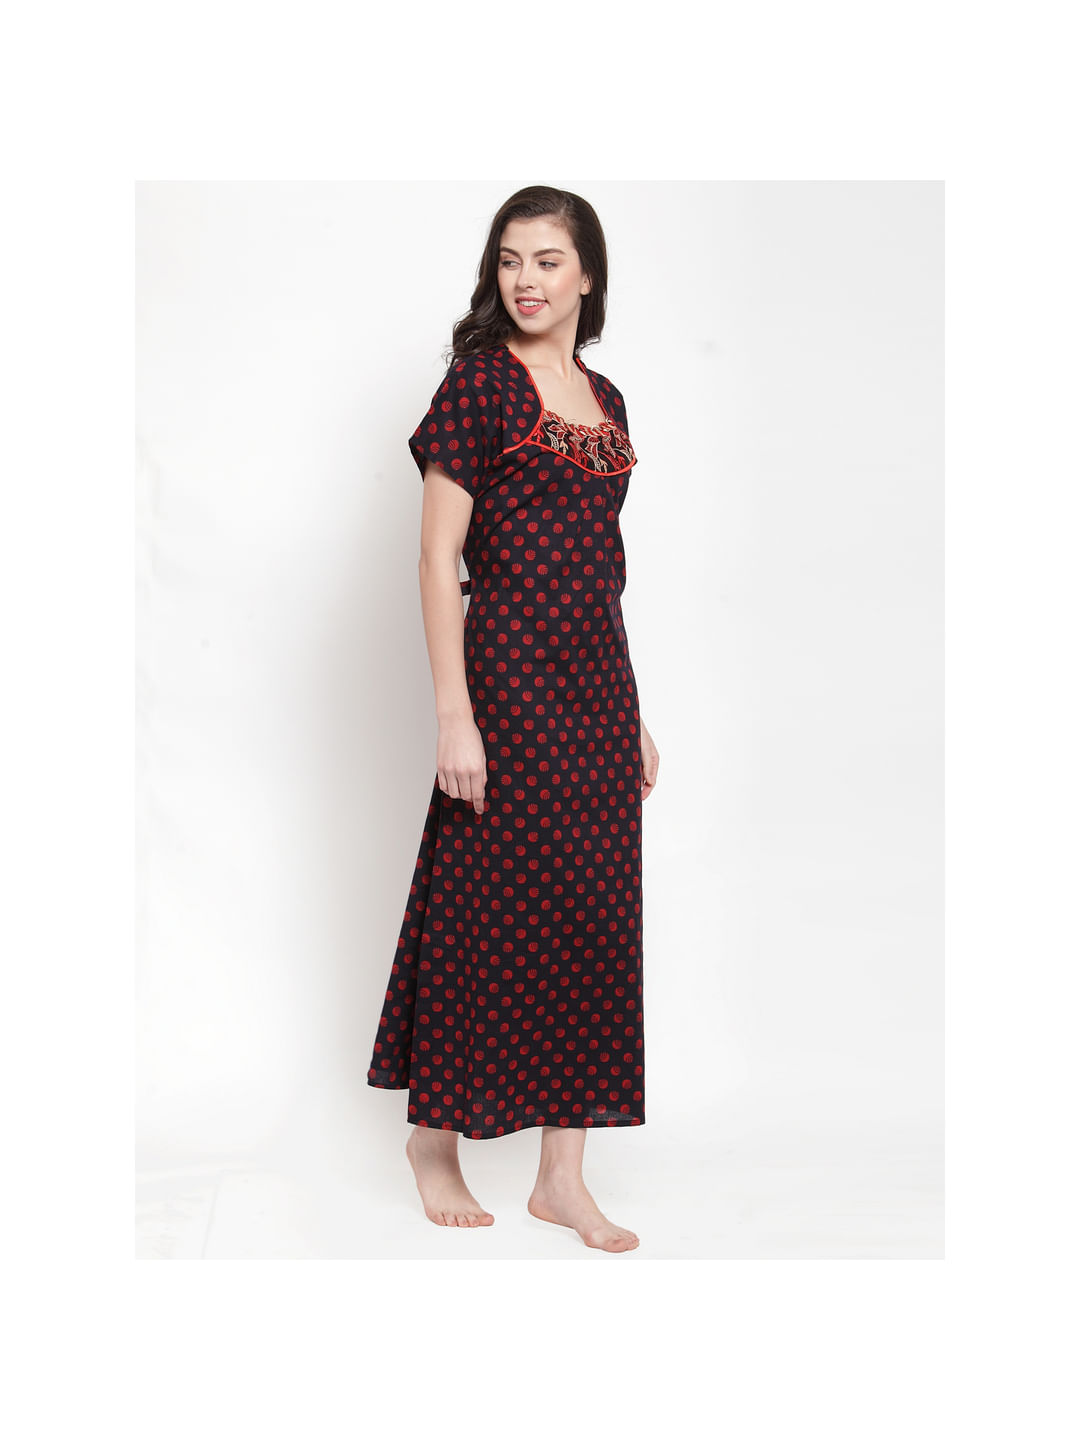 Cotton Black-Red Printed Nighty (Free Size)